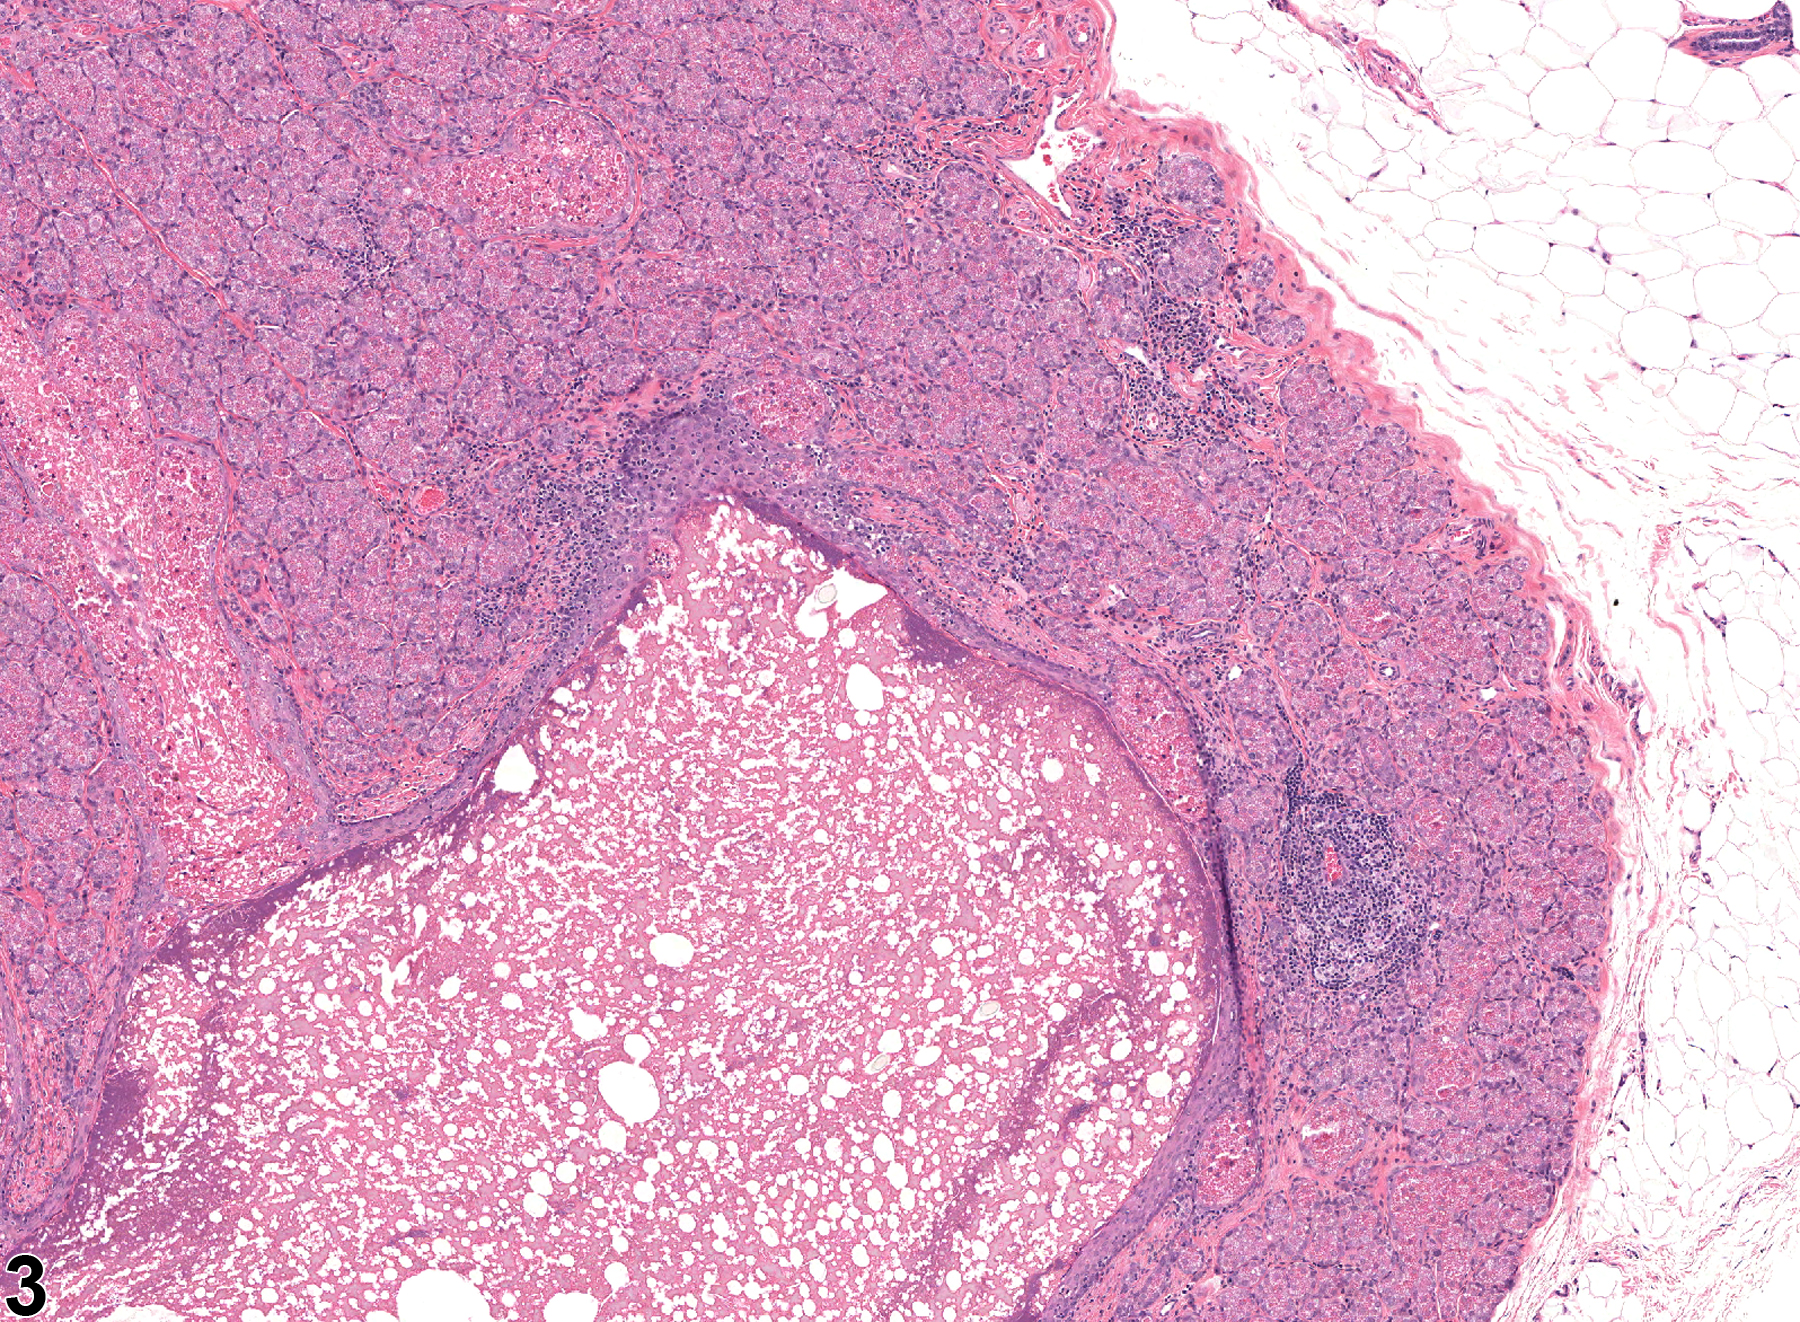 Image of infiltration cellular in the clitoral gland from a female F344/N rat in a subchronic study